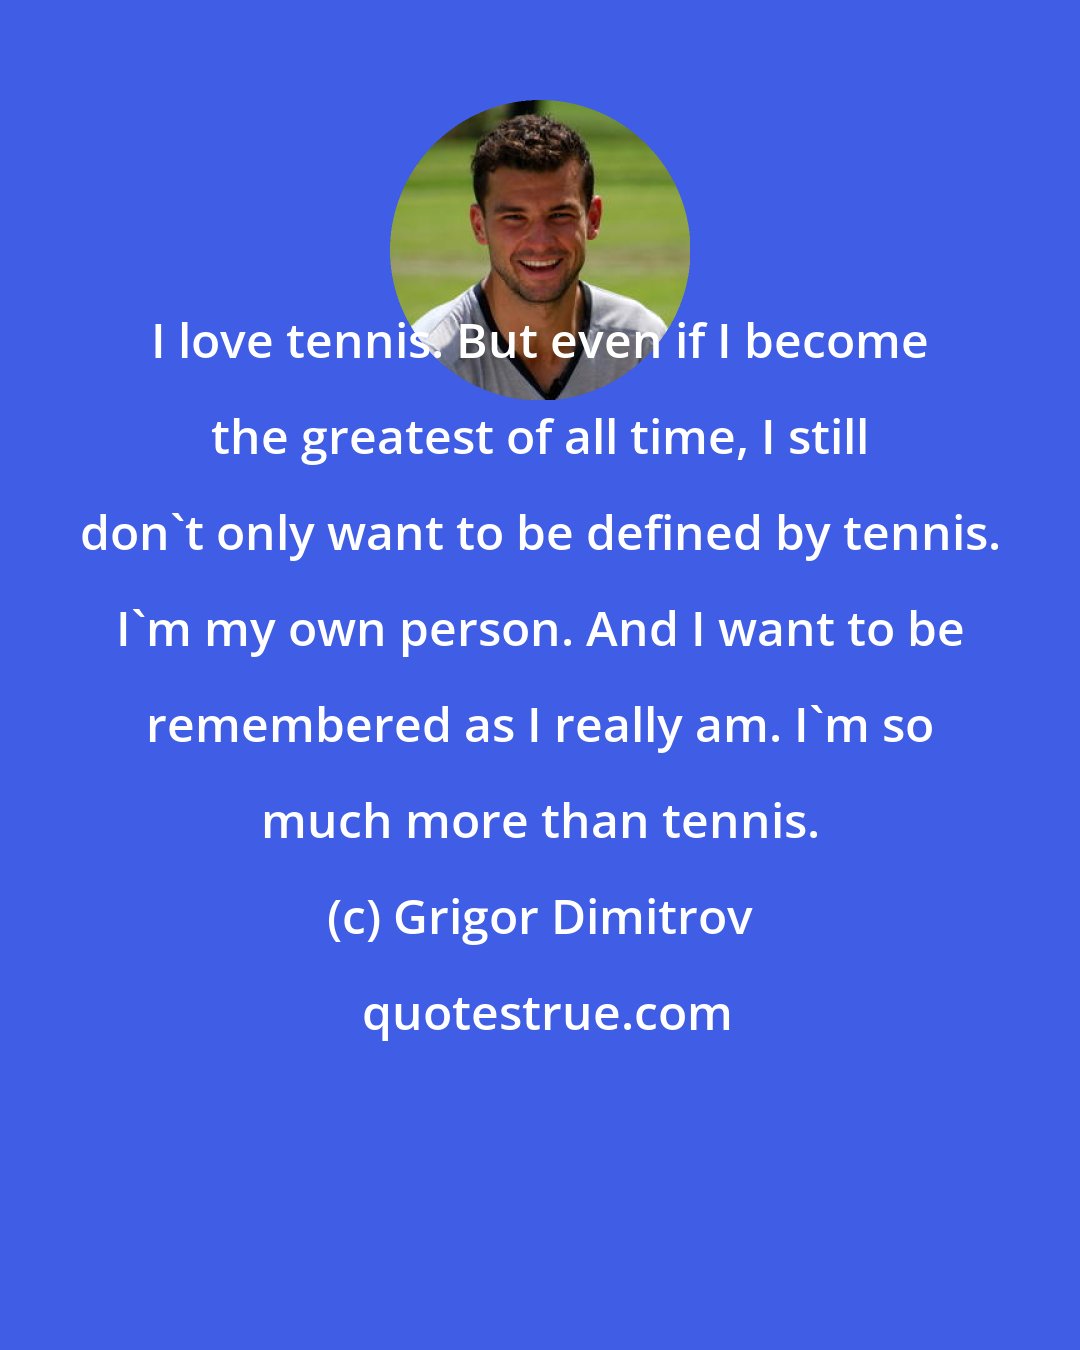 Grigor Dimitrov: I love tennis. But even if I become the greatest of all time, I still don't only want to be defined by tennis. I'm my own person. And I want to be remembered as I really am. I'm so much more than tennis.